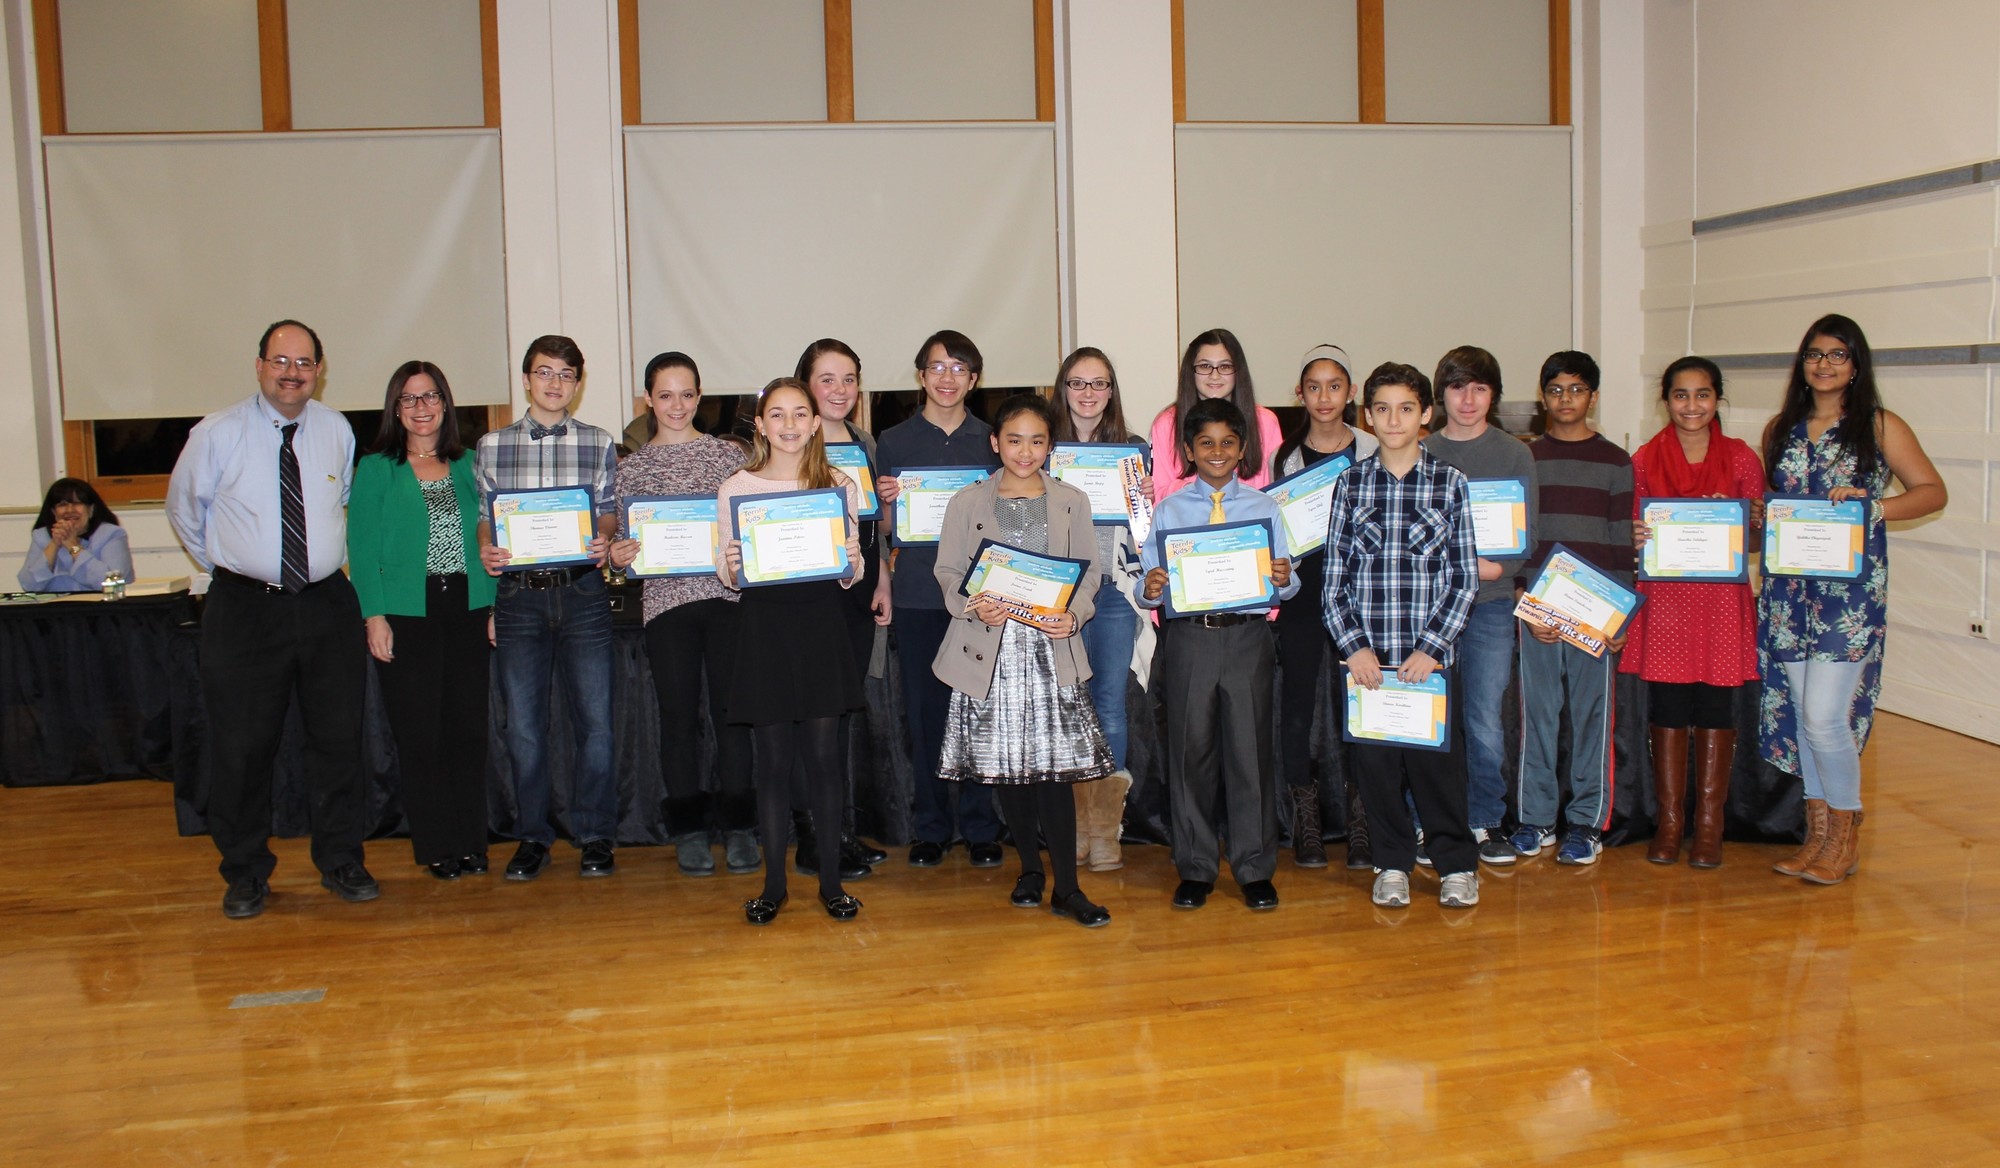 W.T. Clarke Middle School Principal Stacy Breslin and East Meadow Kiwanis President Kevin Kamper, far left, honored W.T. Clarke Middle School students with Terrific Kids awards.